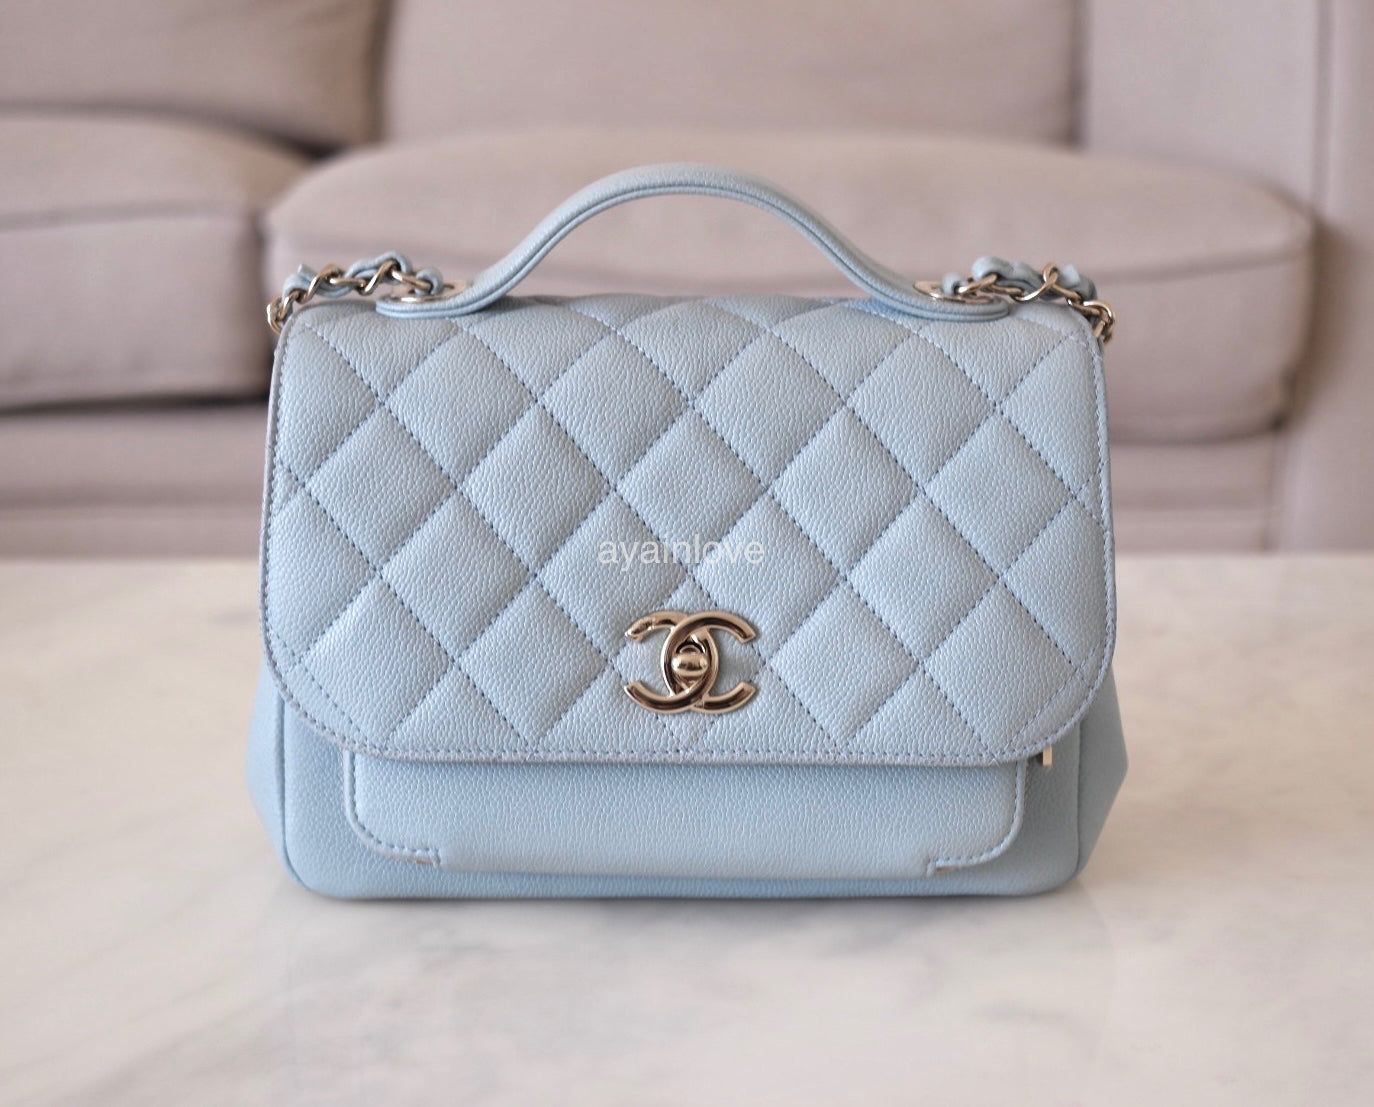 Chanel Business Affinity, Blue Caviar Leather with Gold Hardware